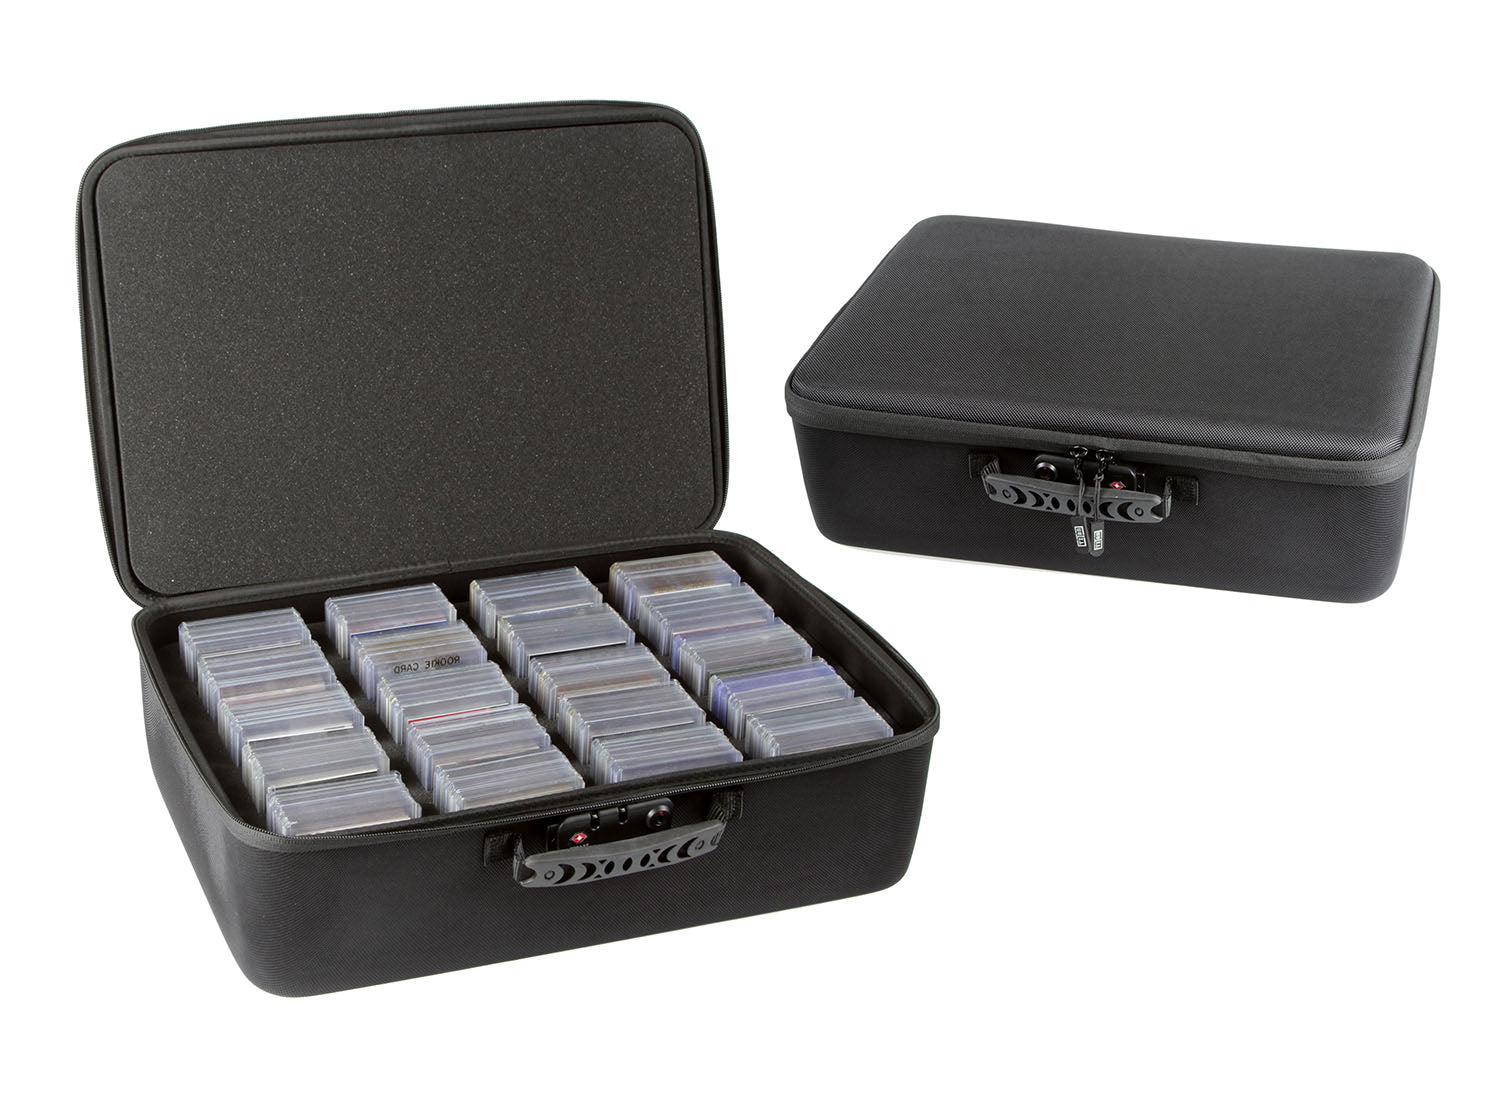 Card Titan Pro Toploader Storage Box and One Touch Sports Card Storage